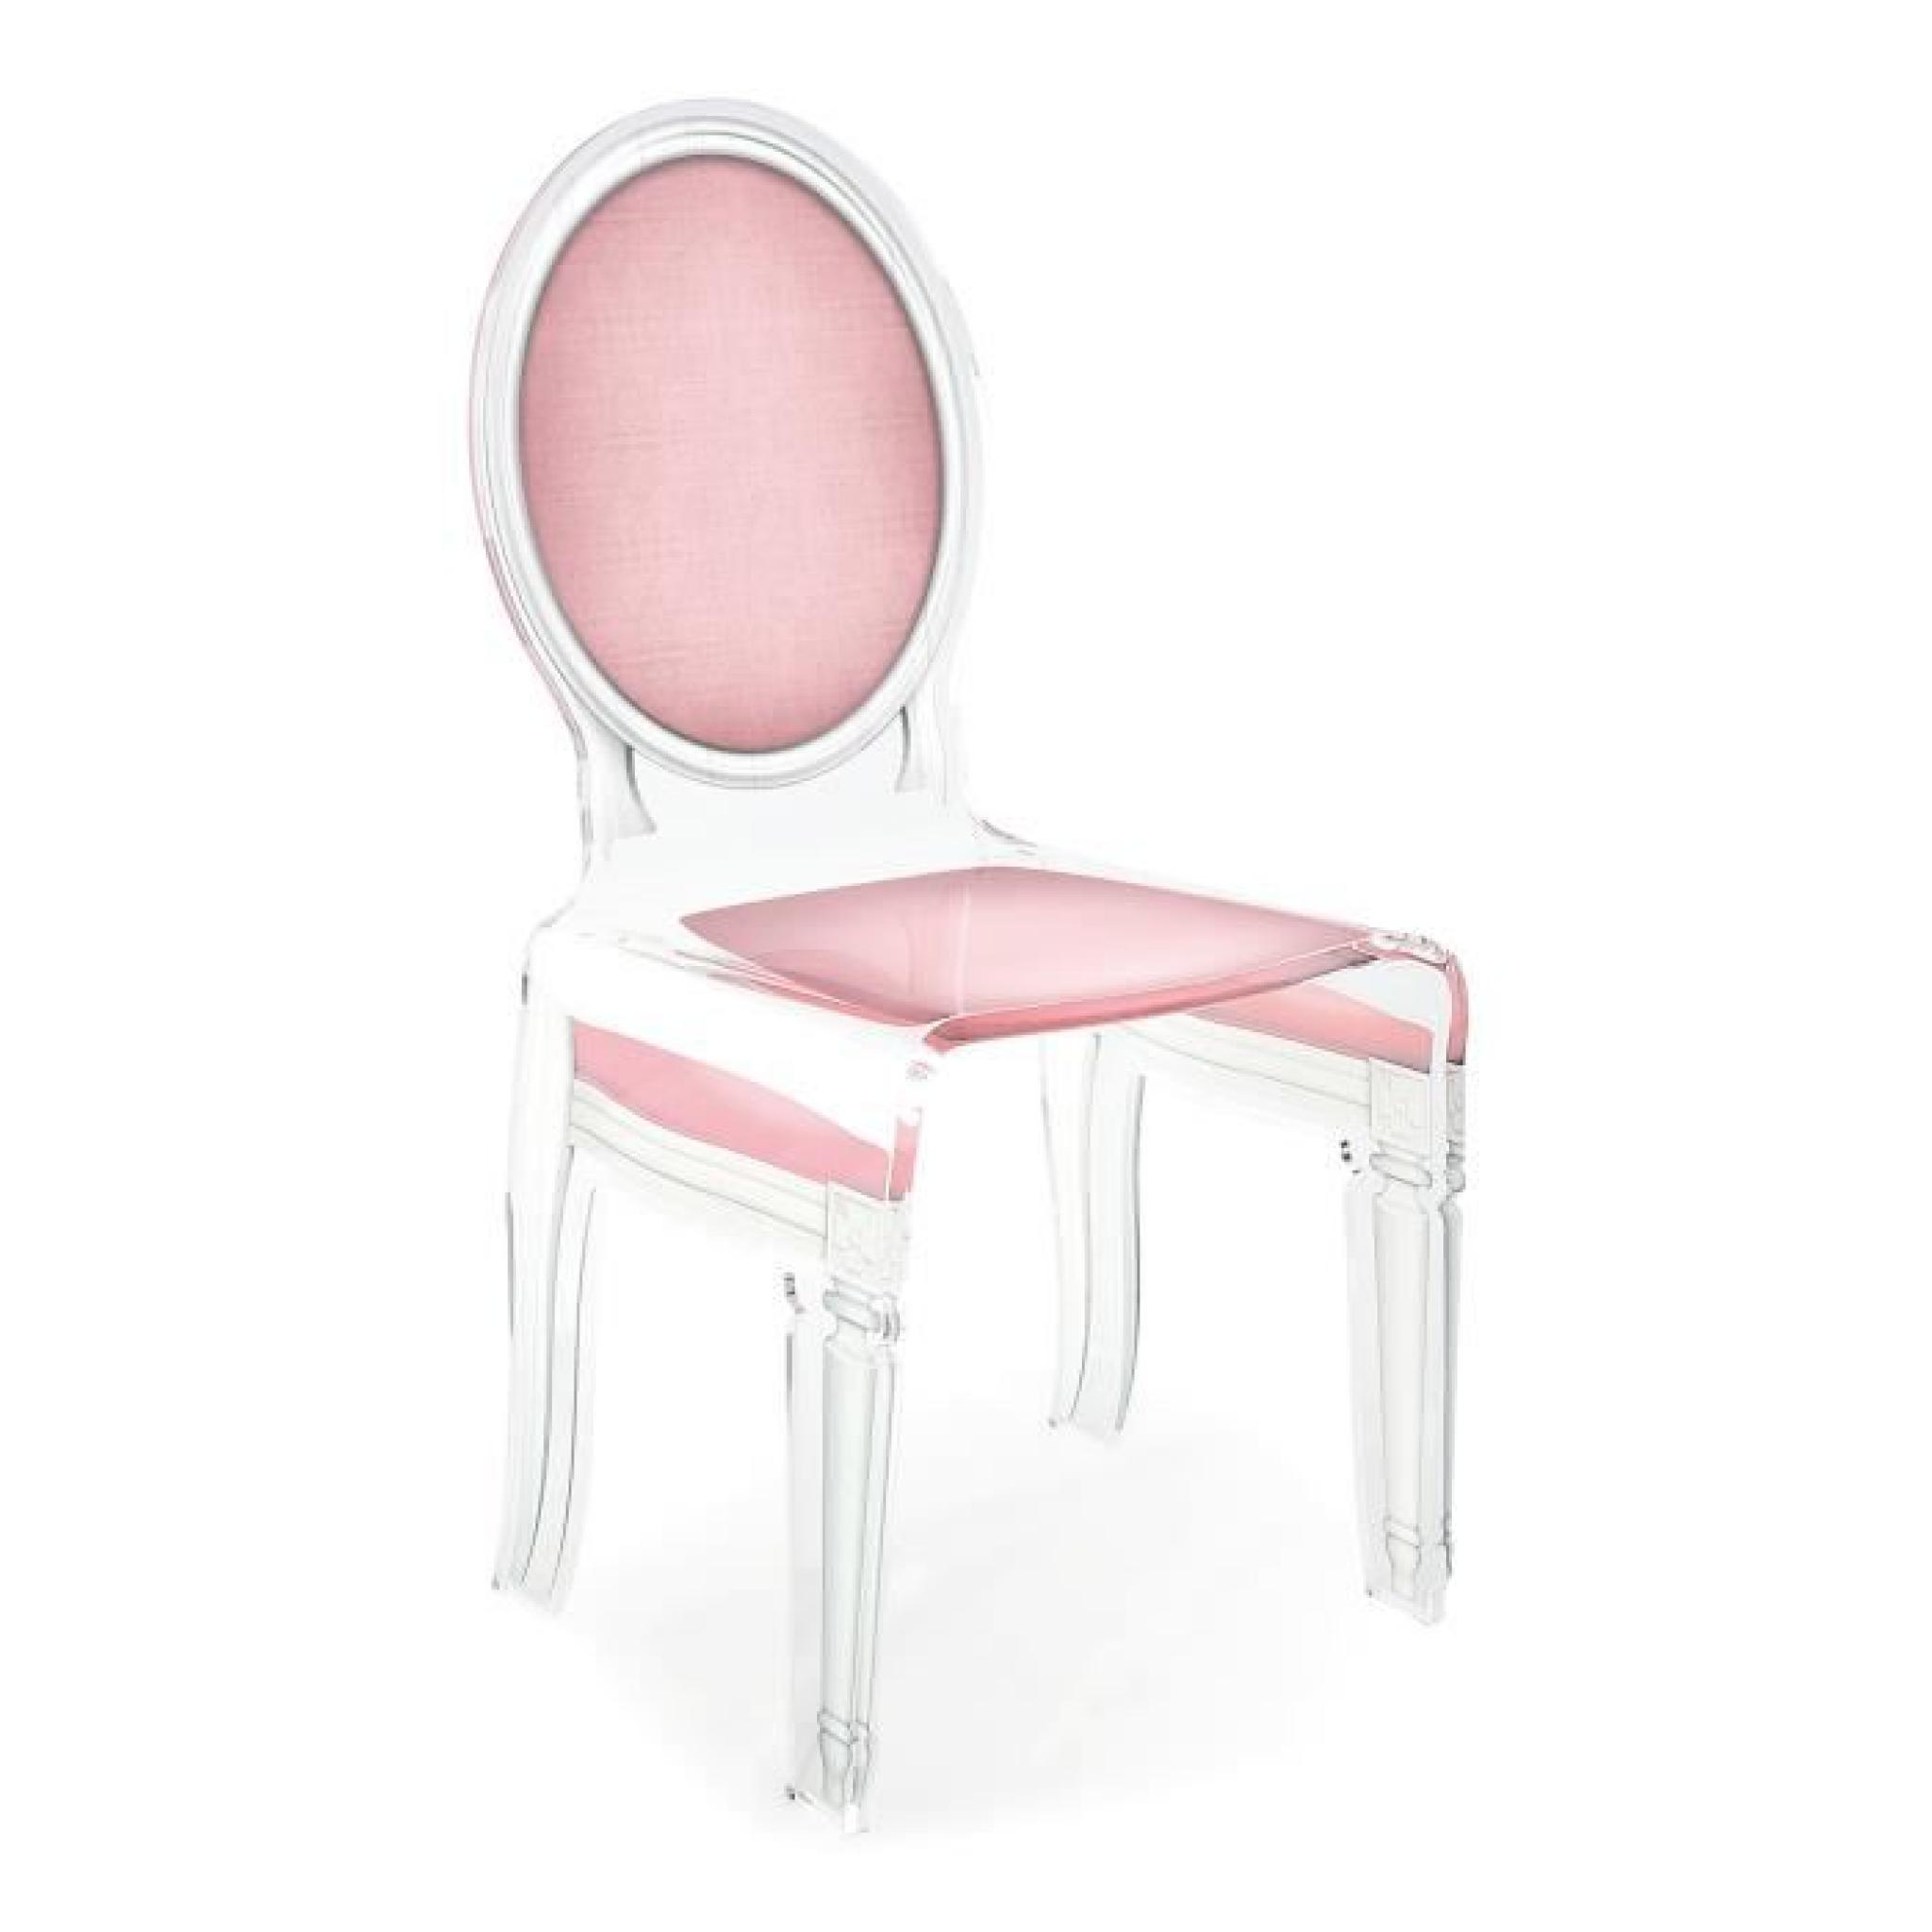 Acrila - Chaise Sixteen - Rose pale